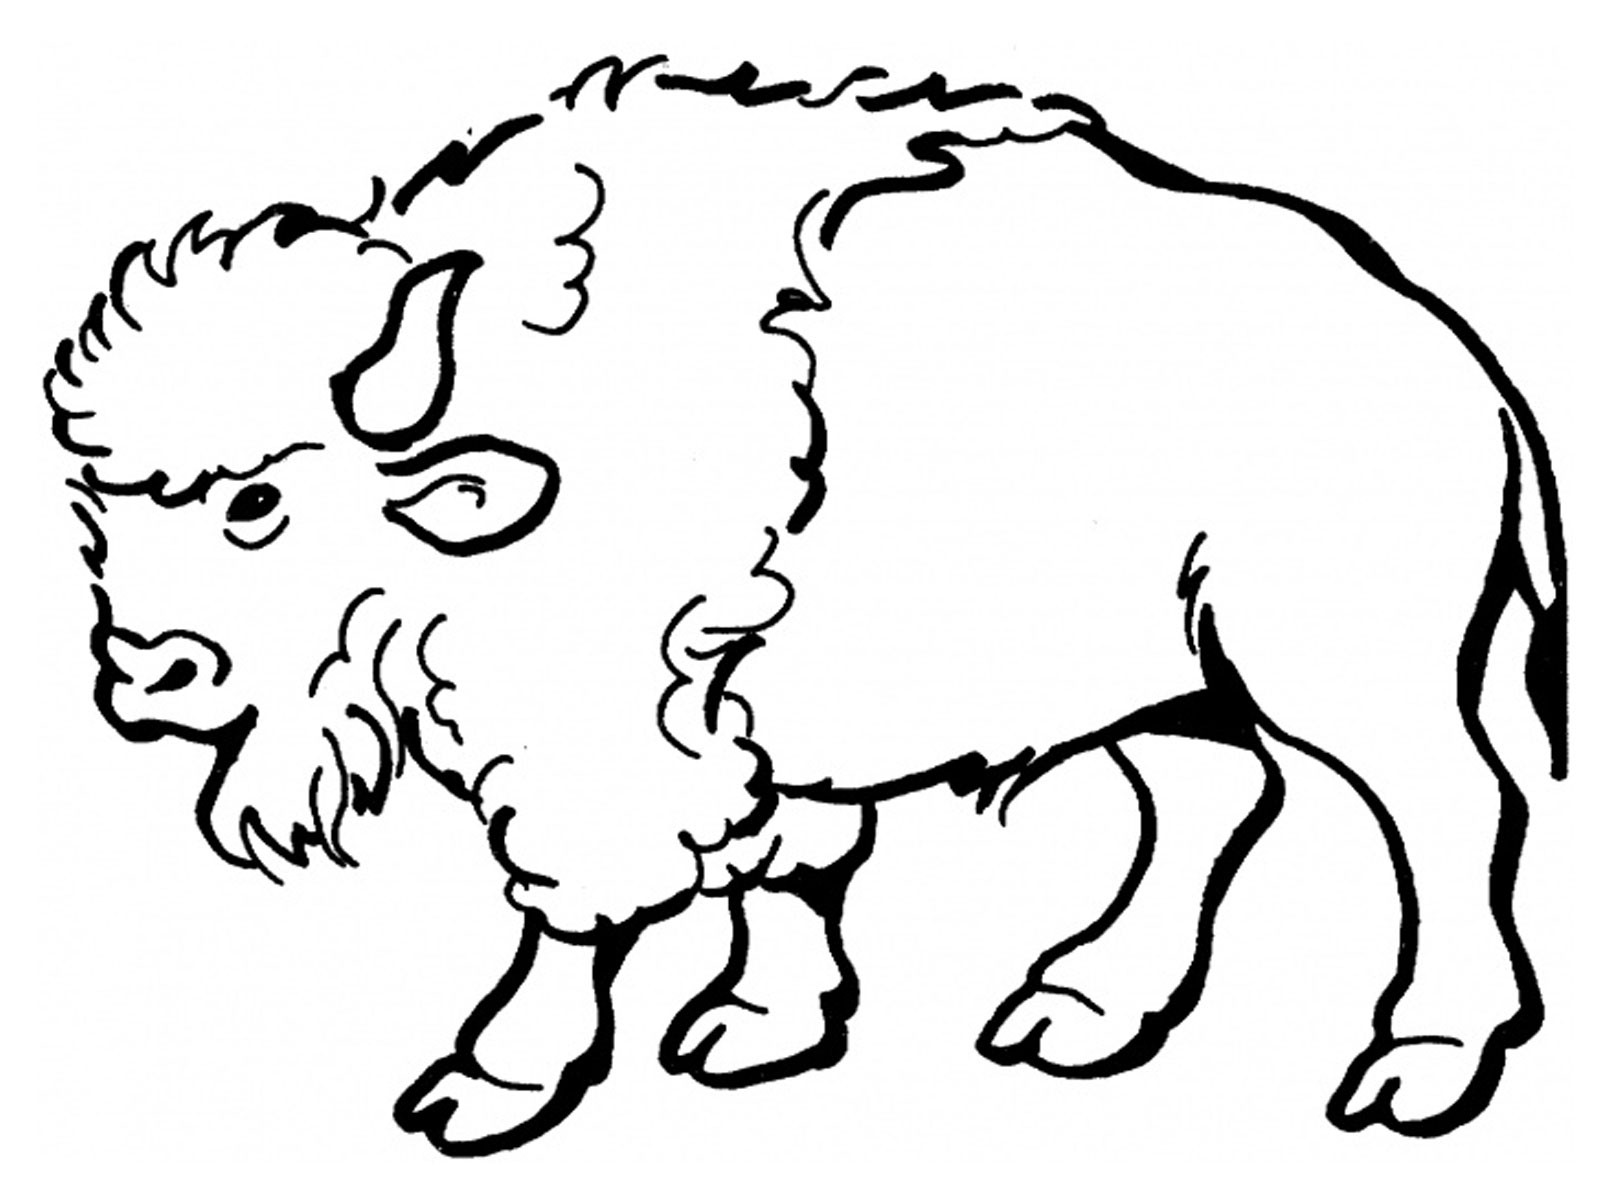 Bison Coloring Pages For Kids   Realistic Coloring Pages